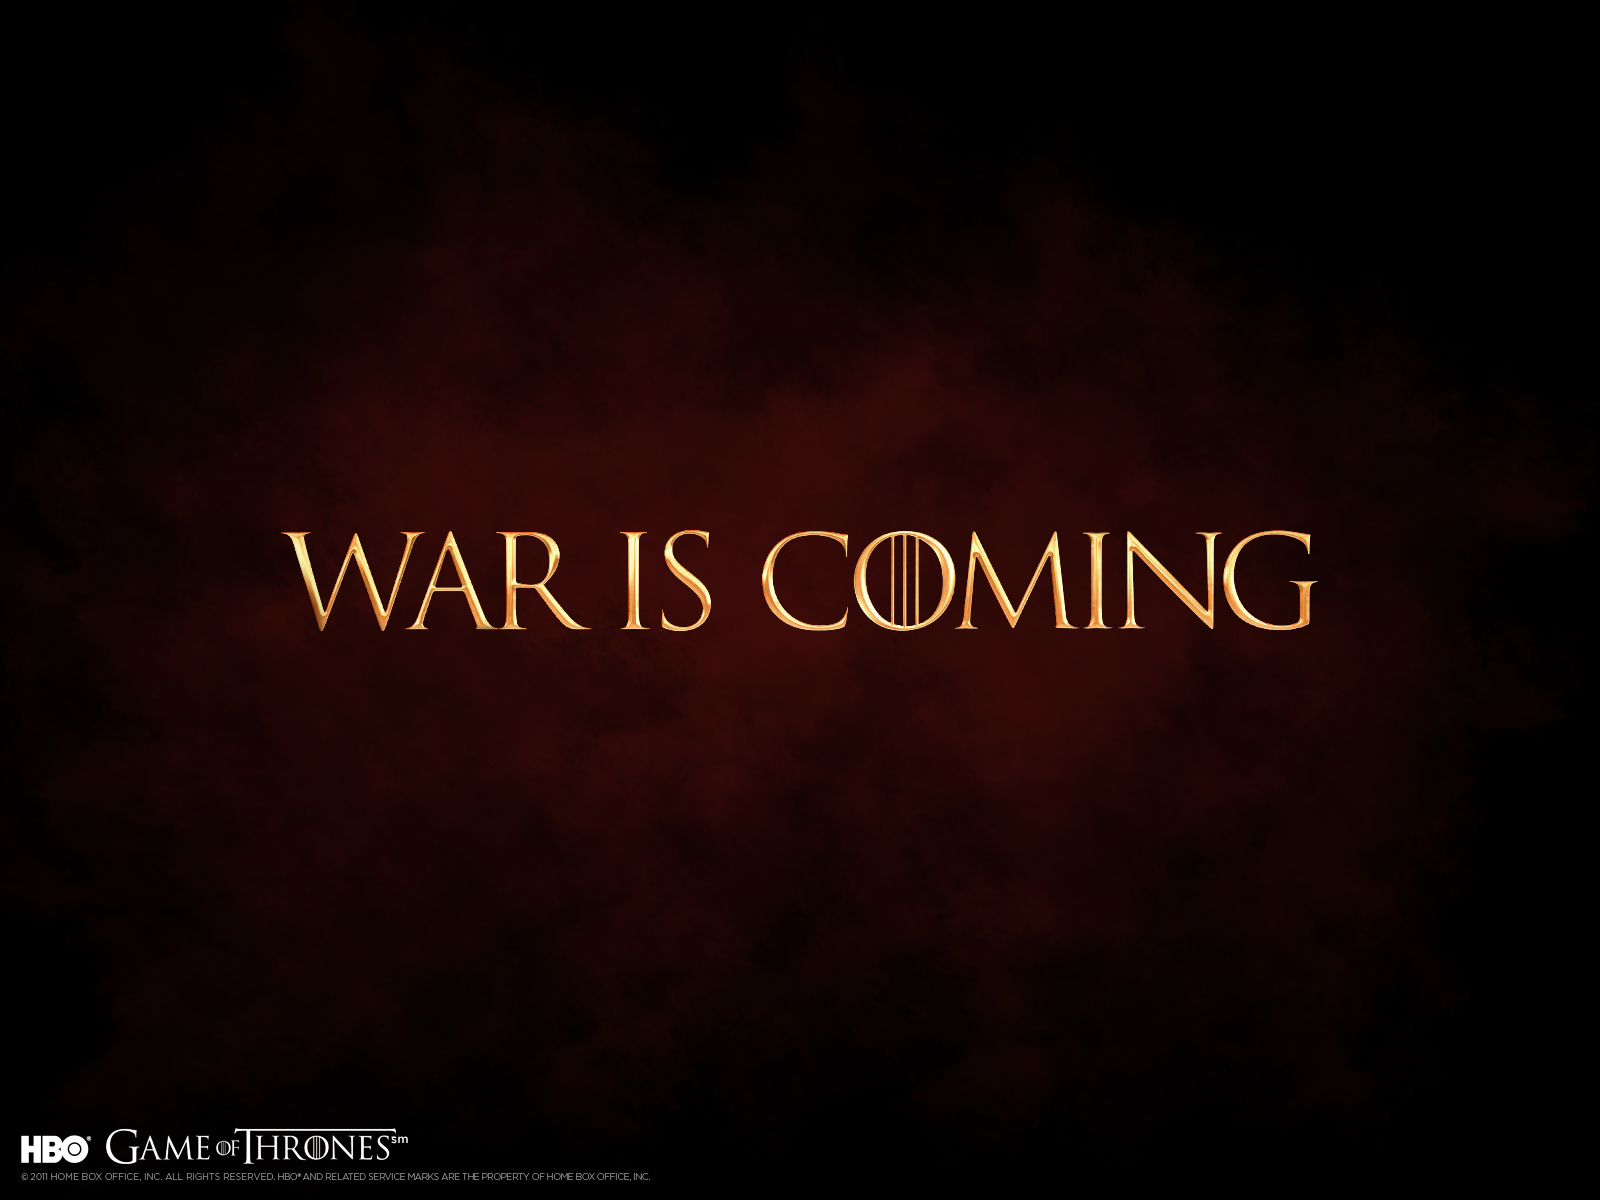 Game of Thrones wallpapers HQ Wallpapers 1600x1200